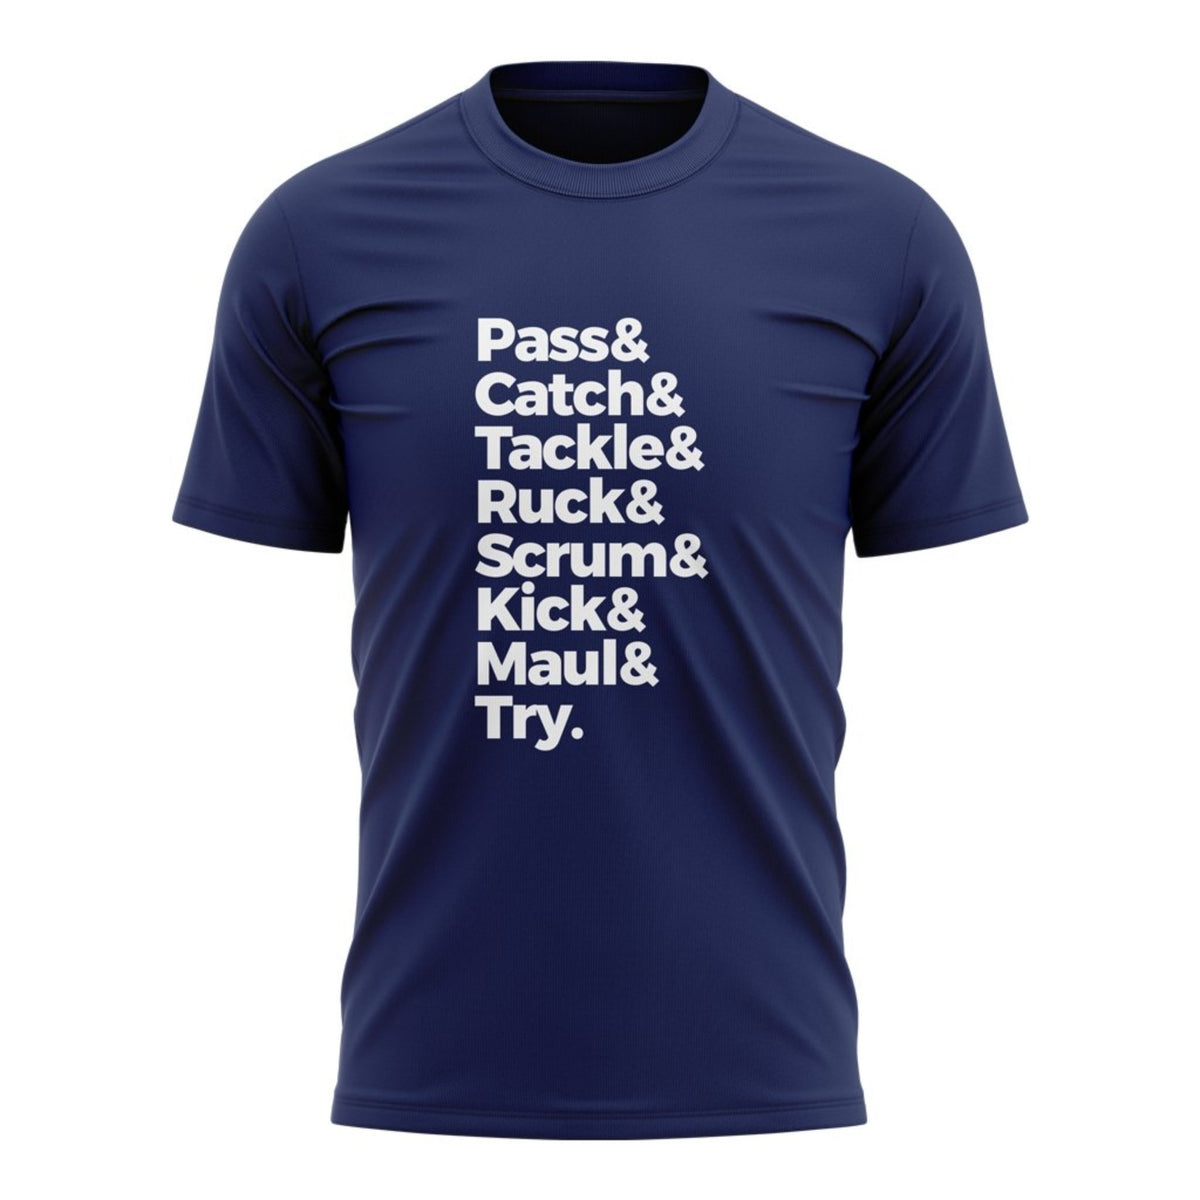 Rugby Ontario &quot;Try&quot; Tee - Youth - www.therugbyshop.com www.therugbyshop.com YOUTH / NAVY / XS XIX Brands TEES Rugby Ontario &quot;Try&quot; Tee - Youth